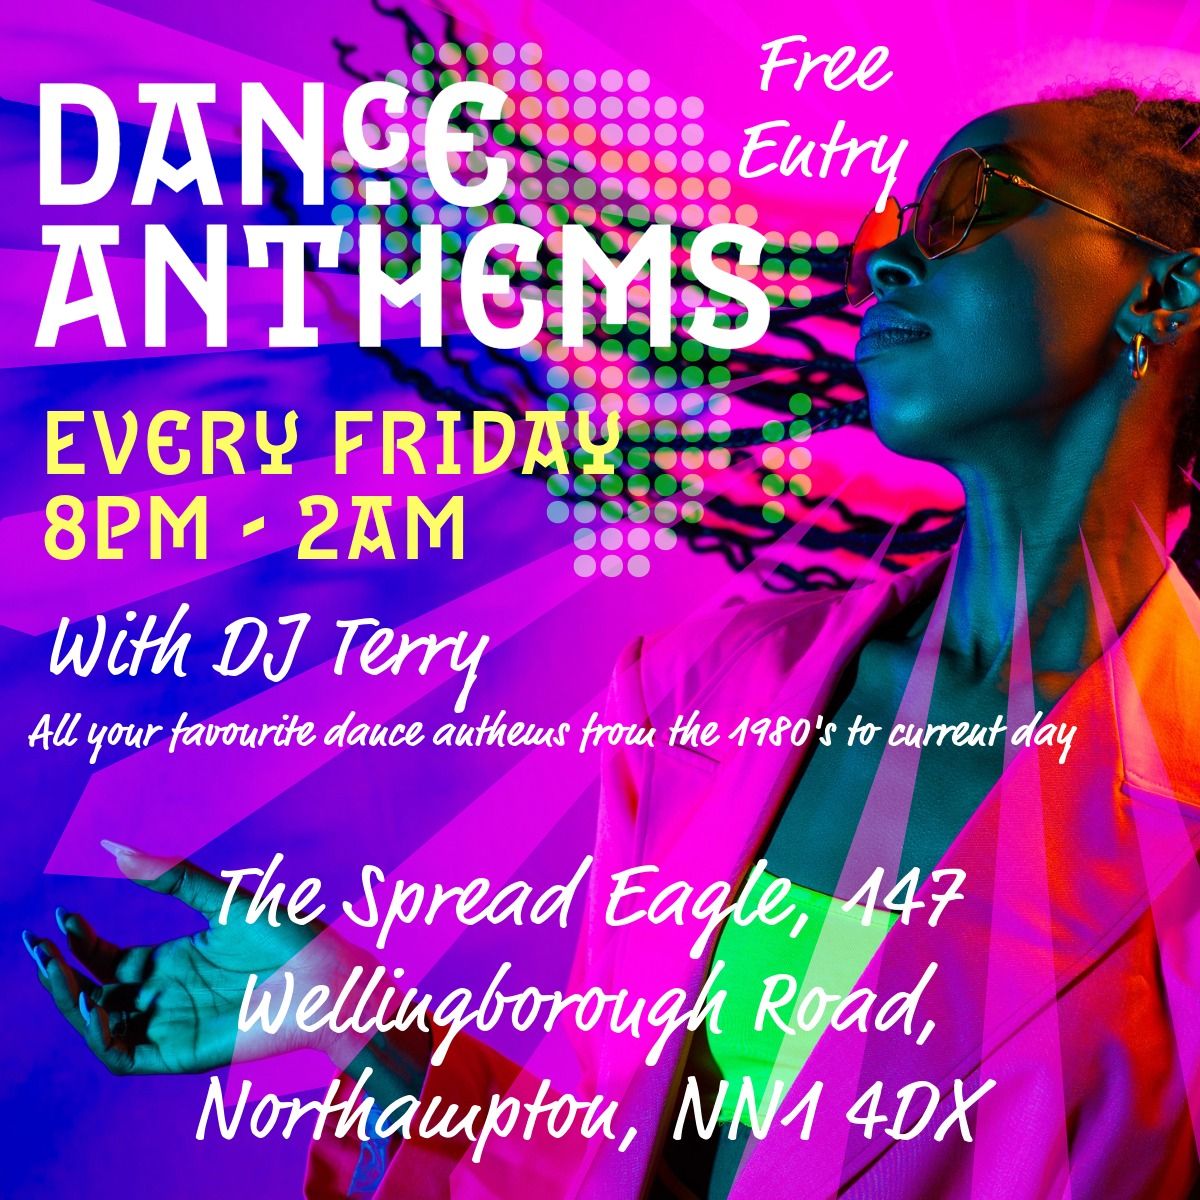 Dance Anthems - Every Friday with DJ Terry